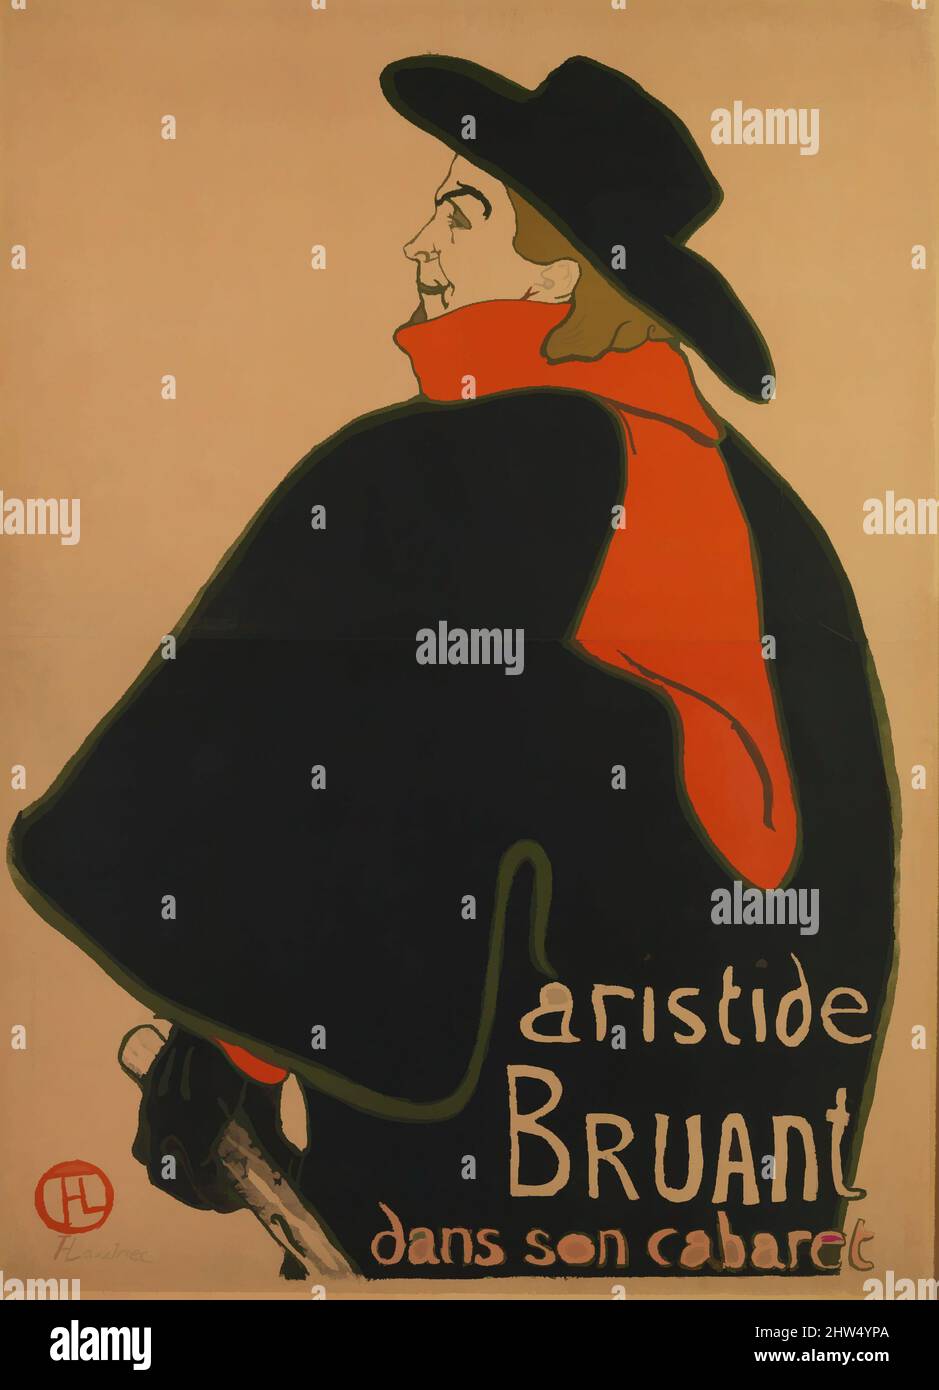 Art inspired by Aristide Bruant, at His Cabaret, 1893, Lithograph (with text) printed in four colors; machine wove paper, Sheet: 54 5/16 x 39 in. (138 x 99 cm), Henri de Toulouse-Lautrec (French, Albi 1864–1901 Saint-André-du-Bois), Aristide Bruant was a successful singer, songwriter, Classic works modernized by Artotop with a splash of modernity. Shapes, color and value, eye-catching visual impact on art. Emotions through freedom of artworks in a contemporary way. A timeless message pursuing a wildly creative new direction. Artists turning to the digital medium and creating the Artotop NFT Stock Photo